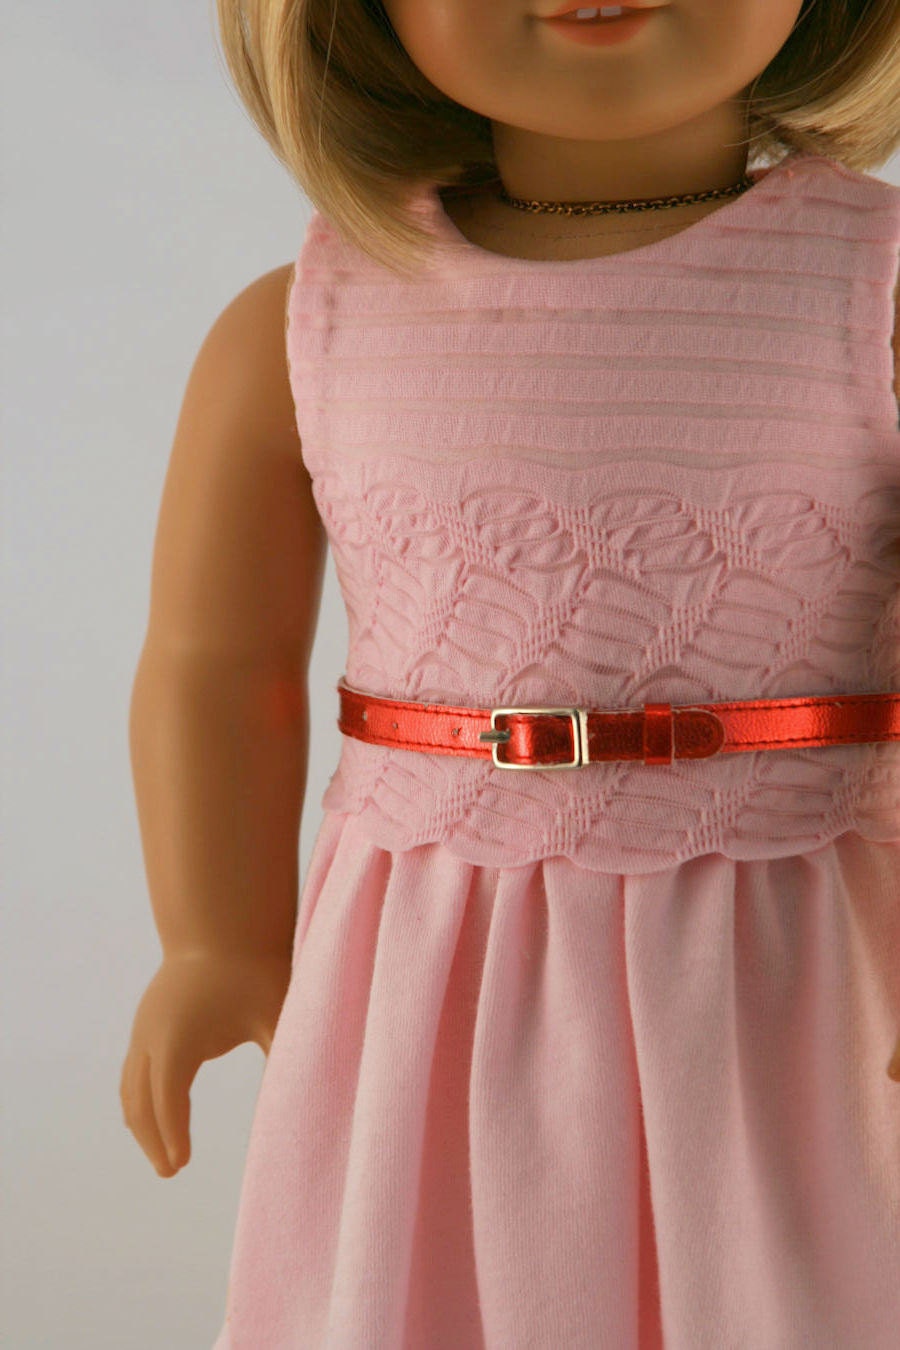 American Girl Doll Clothes - Pink Knit Dress with Red Metallic Belt